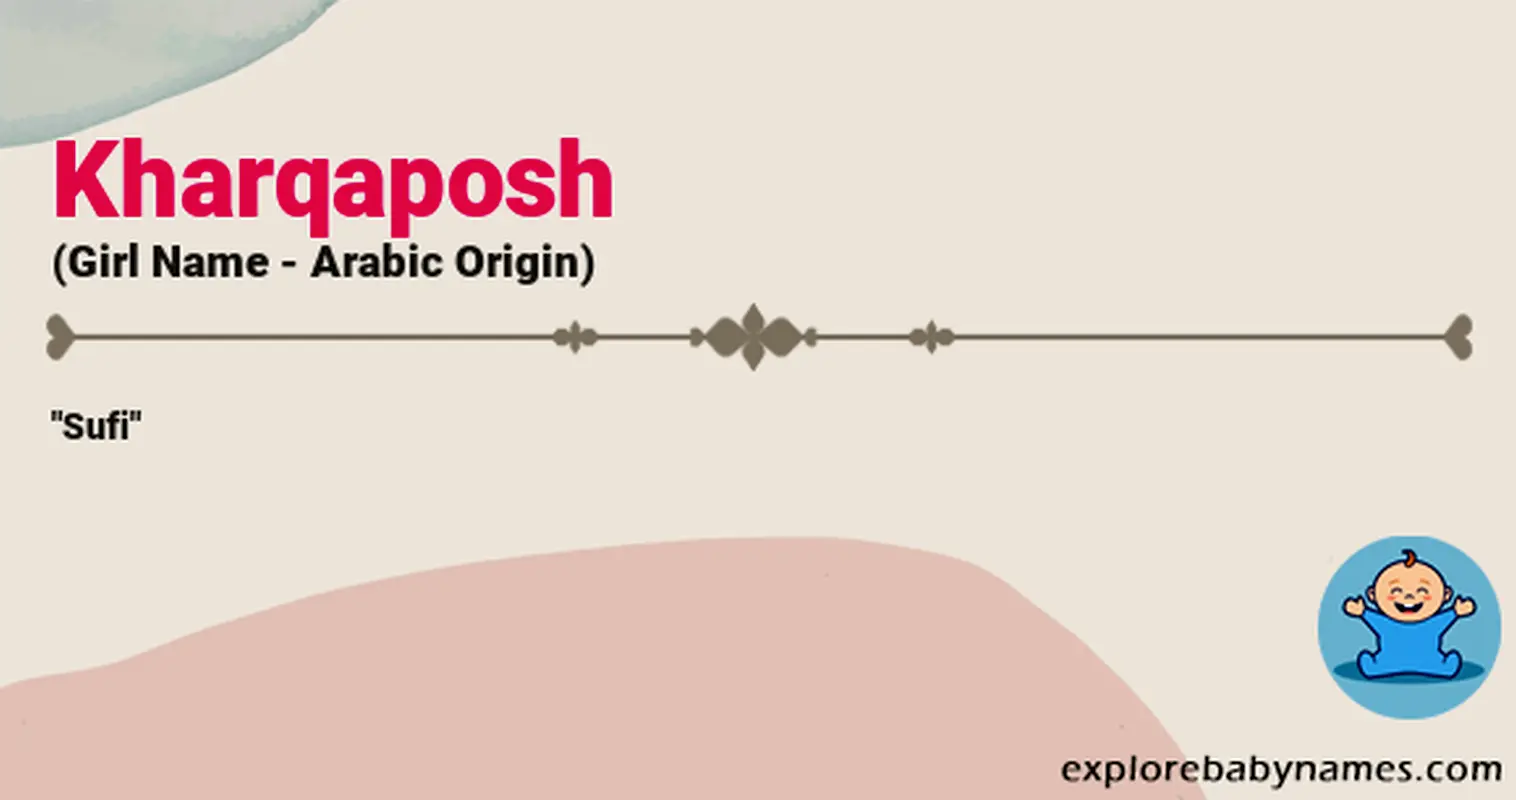 Meaning of Kharqaposh